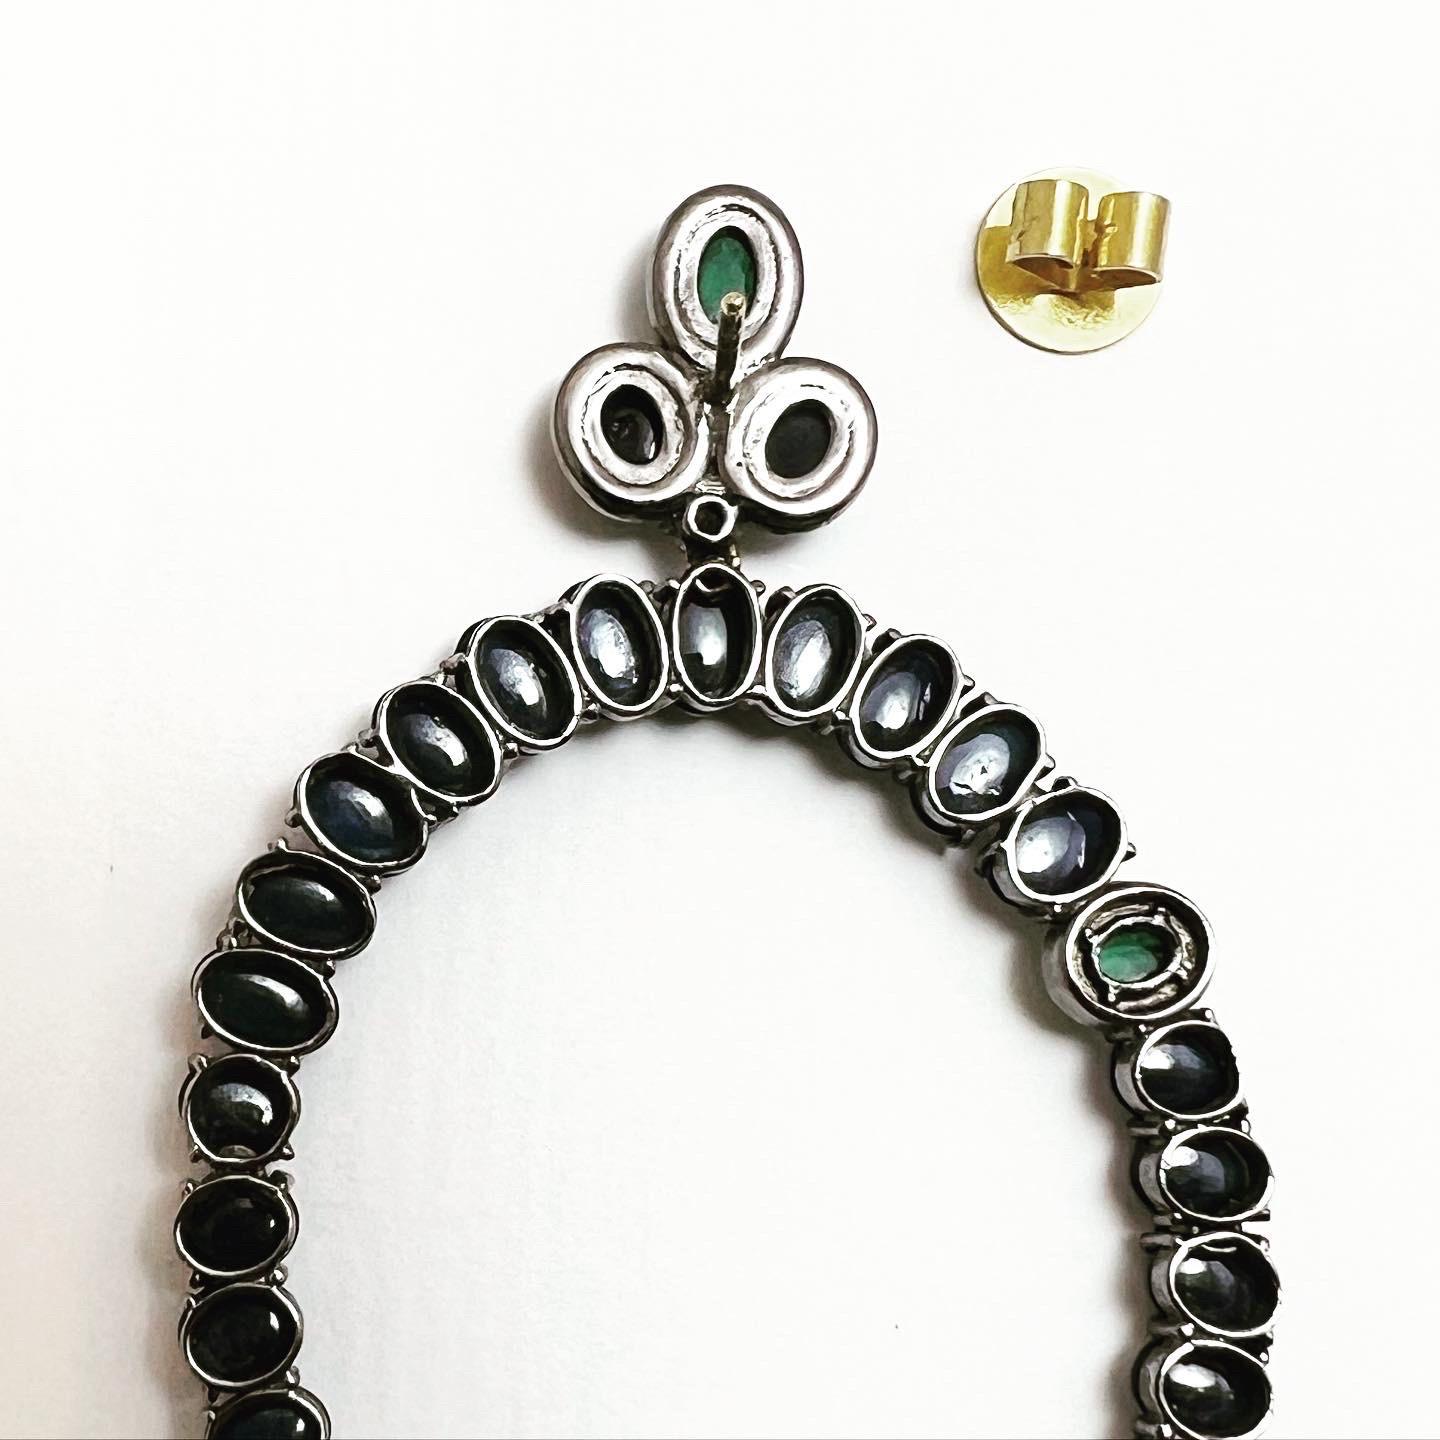 Elegant oval-shaped sapphire and emerald cabochon and diamond frontal Hoop Earrings.
Stud and clutch system.
Befit for any occasion, from day to evening.
18 karat Gold and 925 blackened silver.
Diamond carat weight: 1.08 carat (134